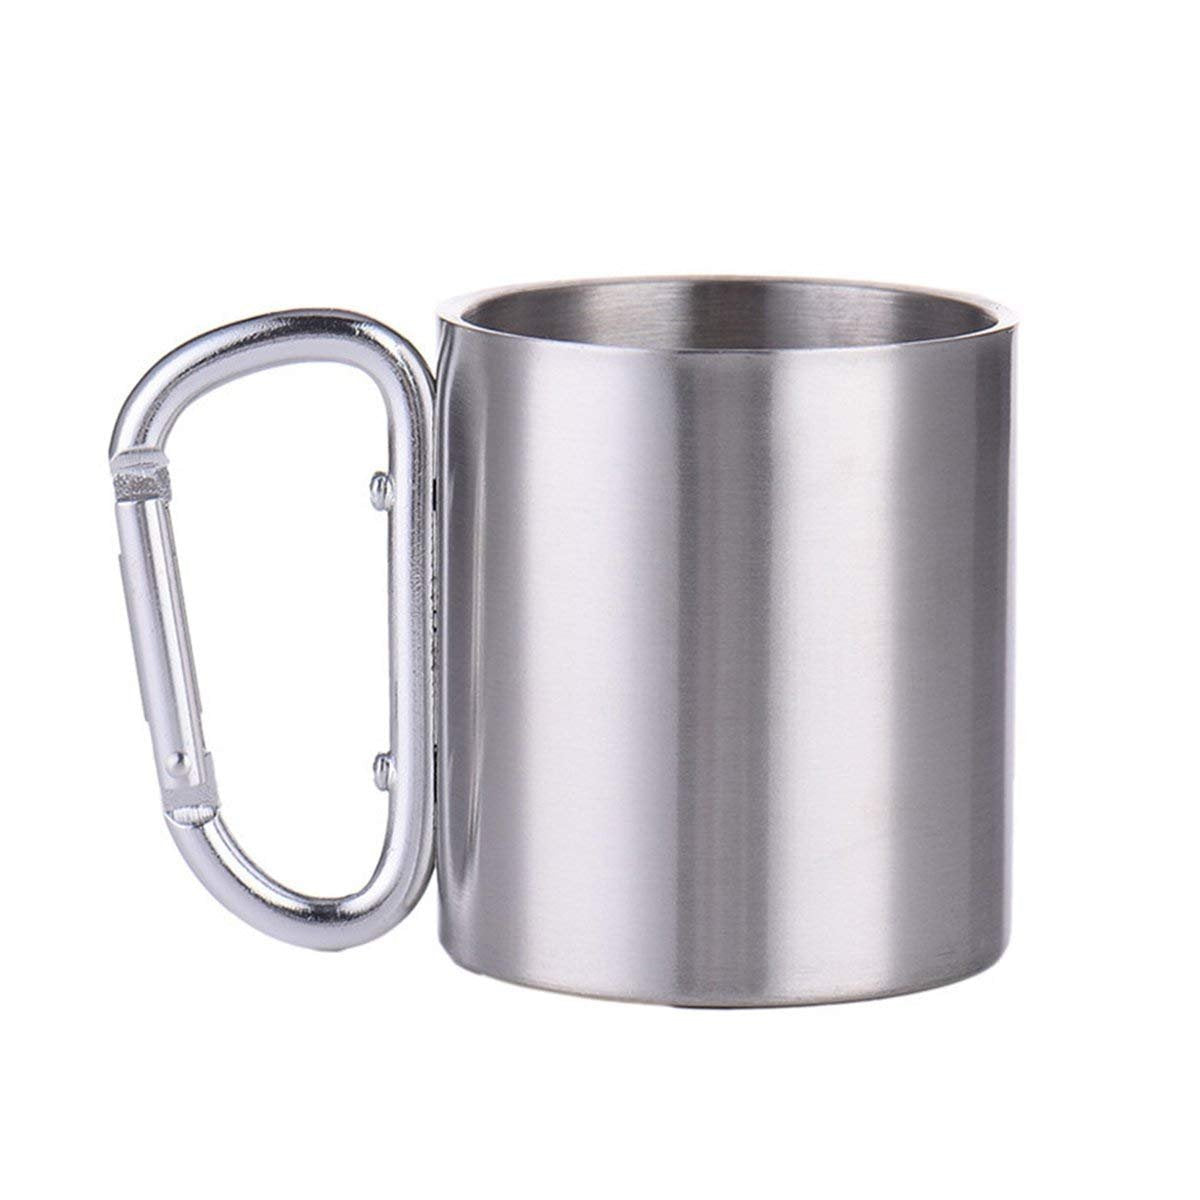 Woohchy 11 Oz Portable Hiking Cup D Clip Handle Camping Carabiner Mug 304 Stainless Steel Hiking Cups 330 ml (11Oz)